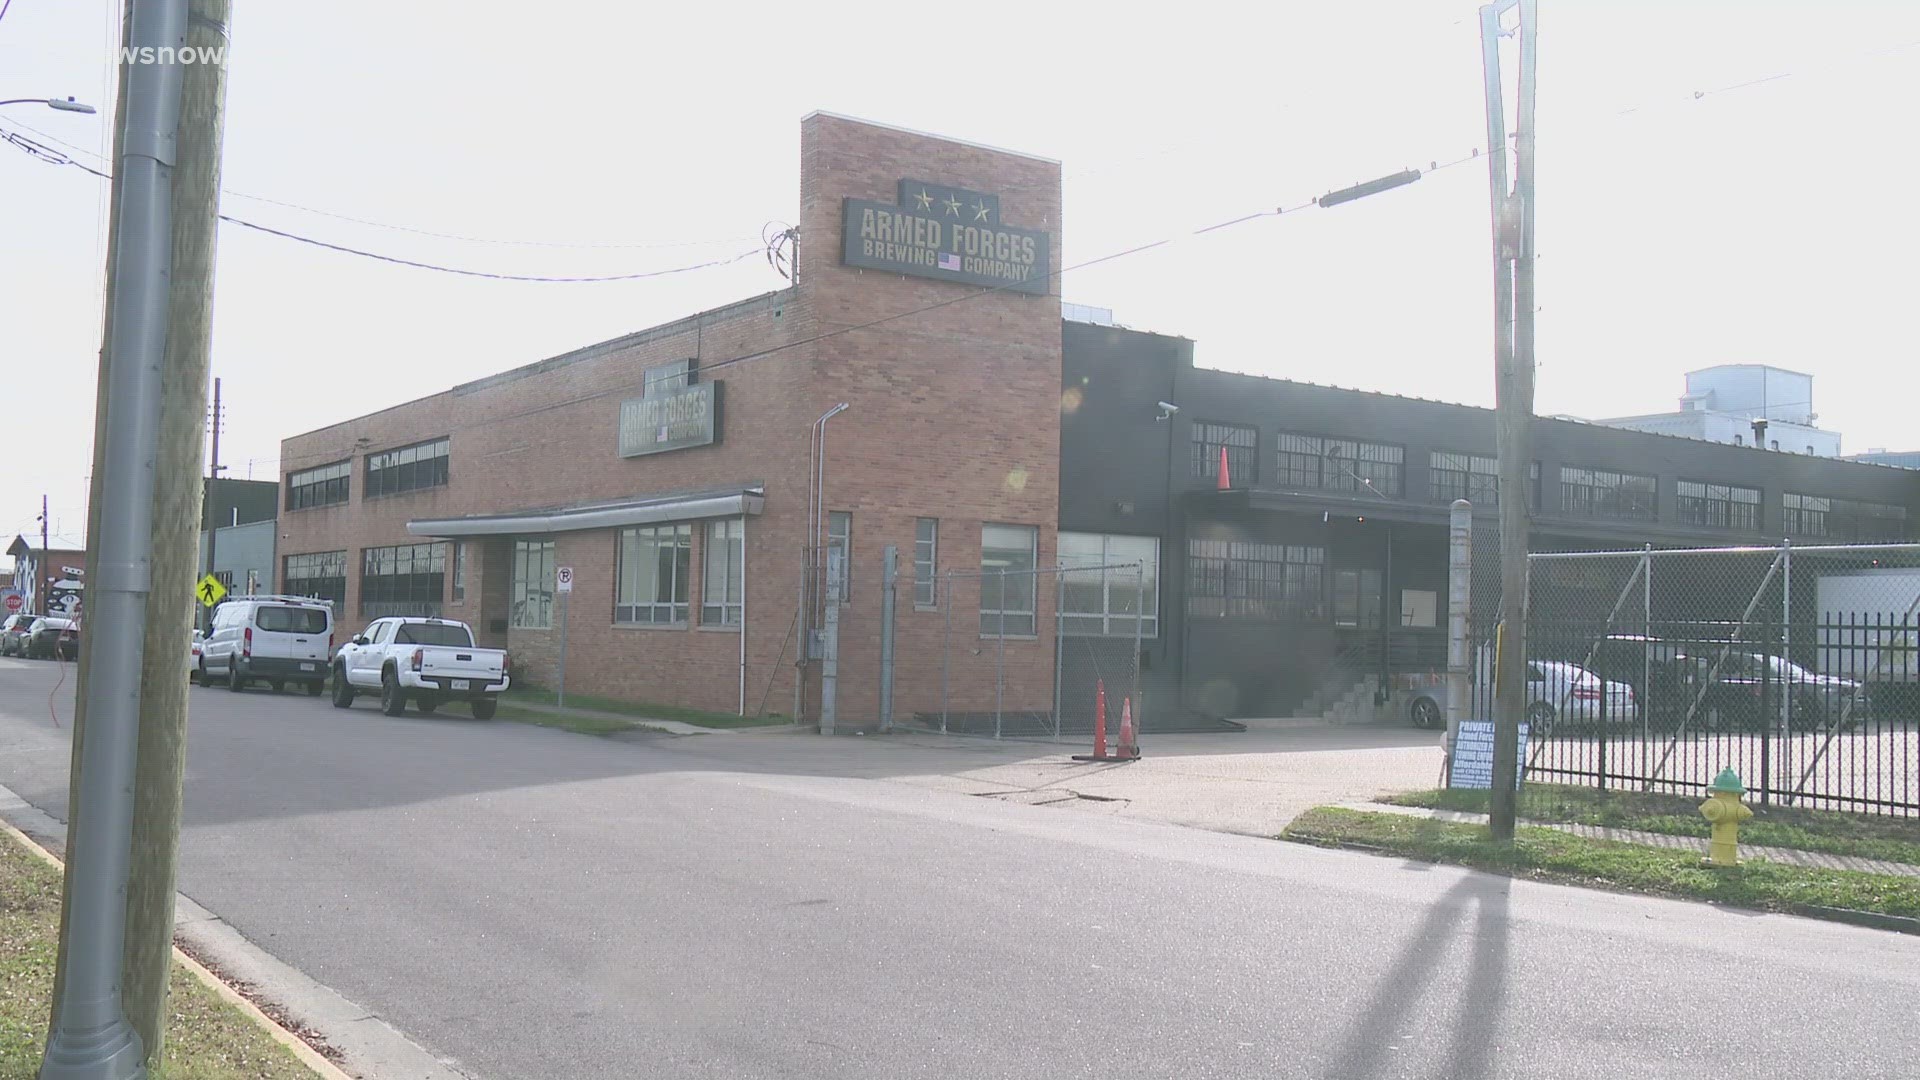 The controversial Armed Forces Brewing Company is cleared to open next month after Norfolk City Council voted 6-1 to approve the business’s conditional use permits.